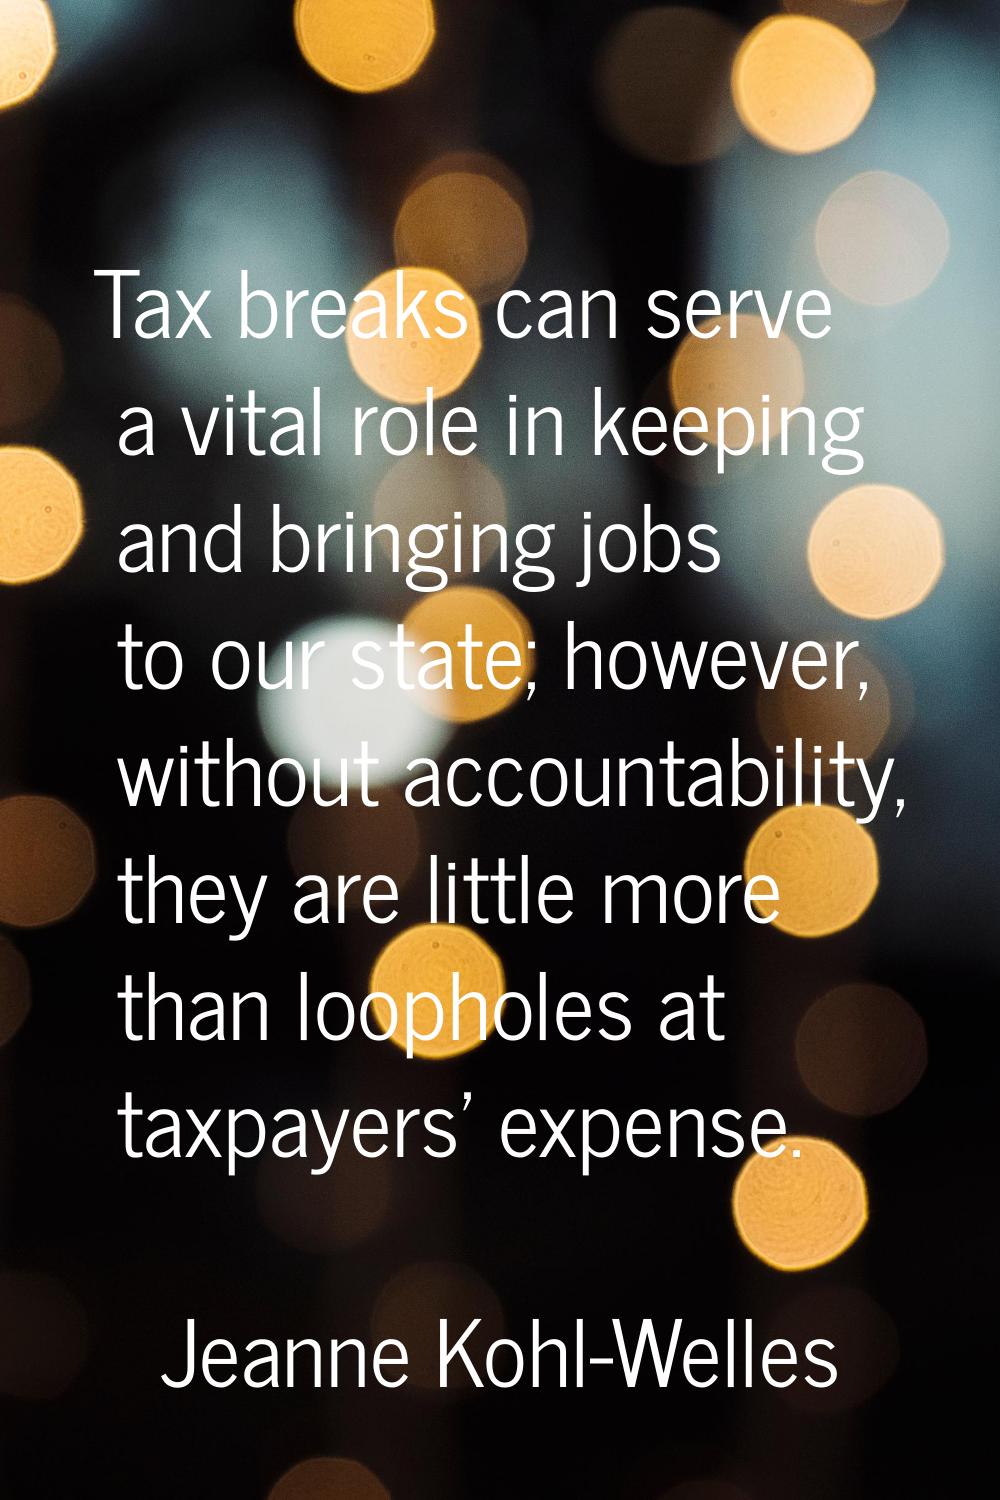 Tax breaks can serve a vital role in keeping and bringing jobs to our state; however, without accou